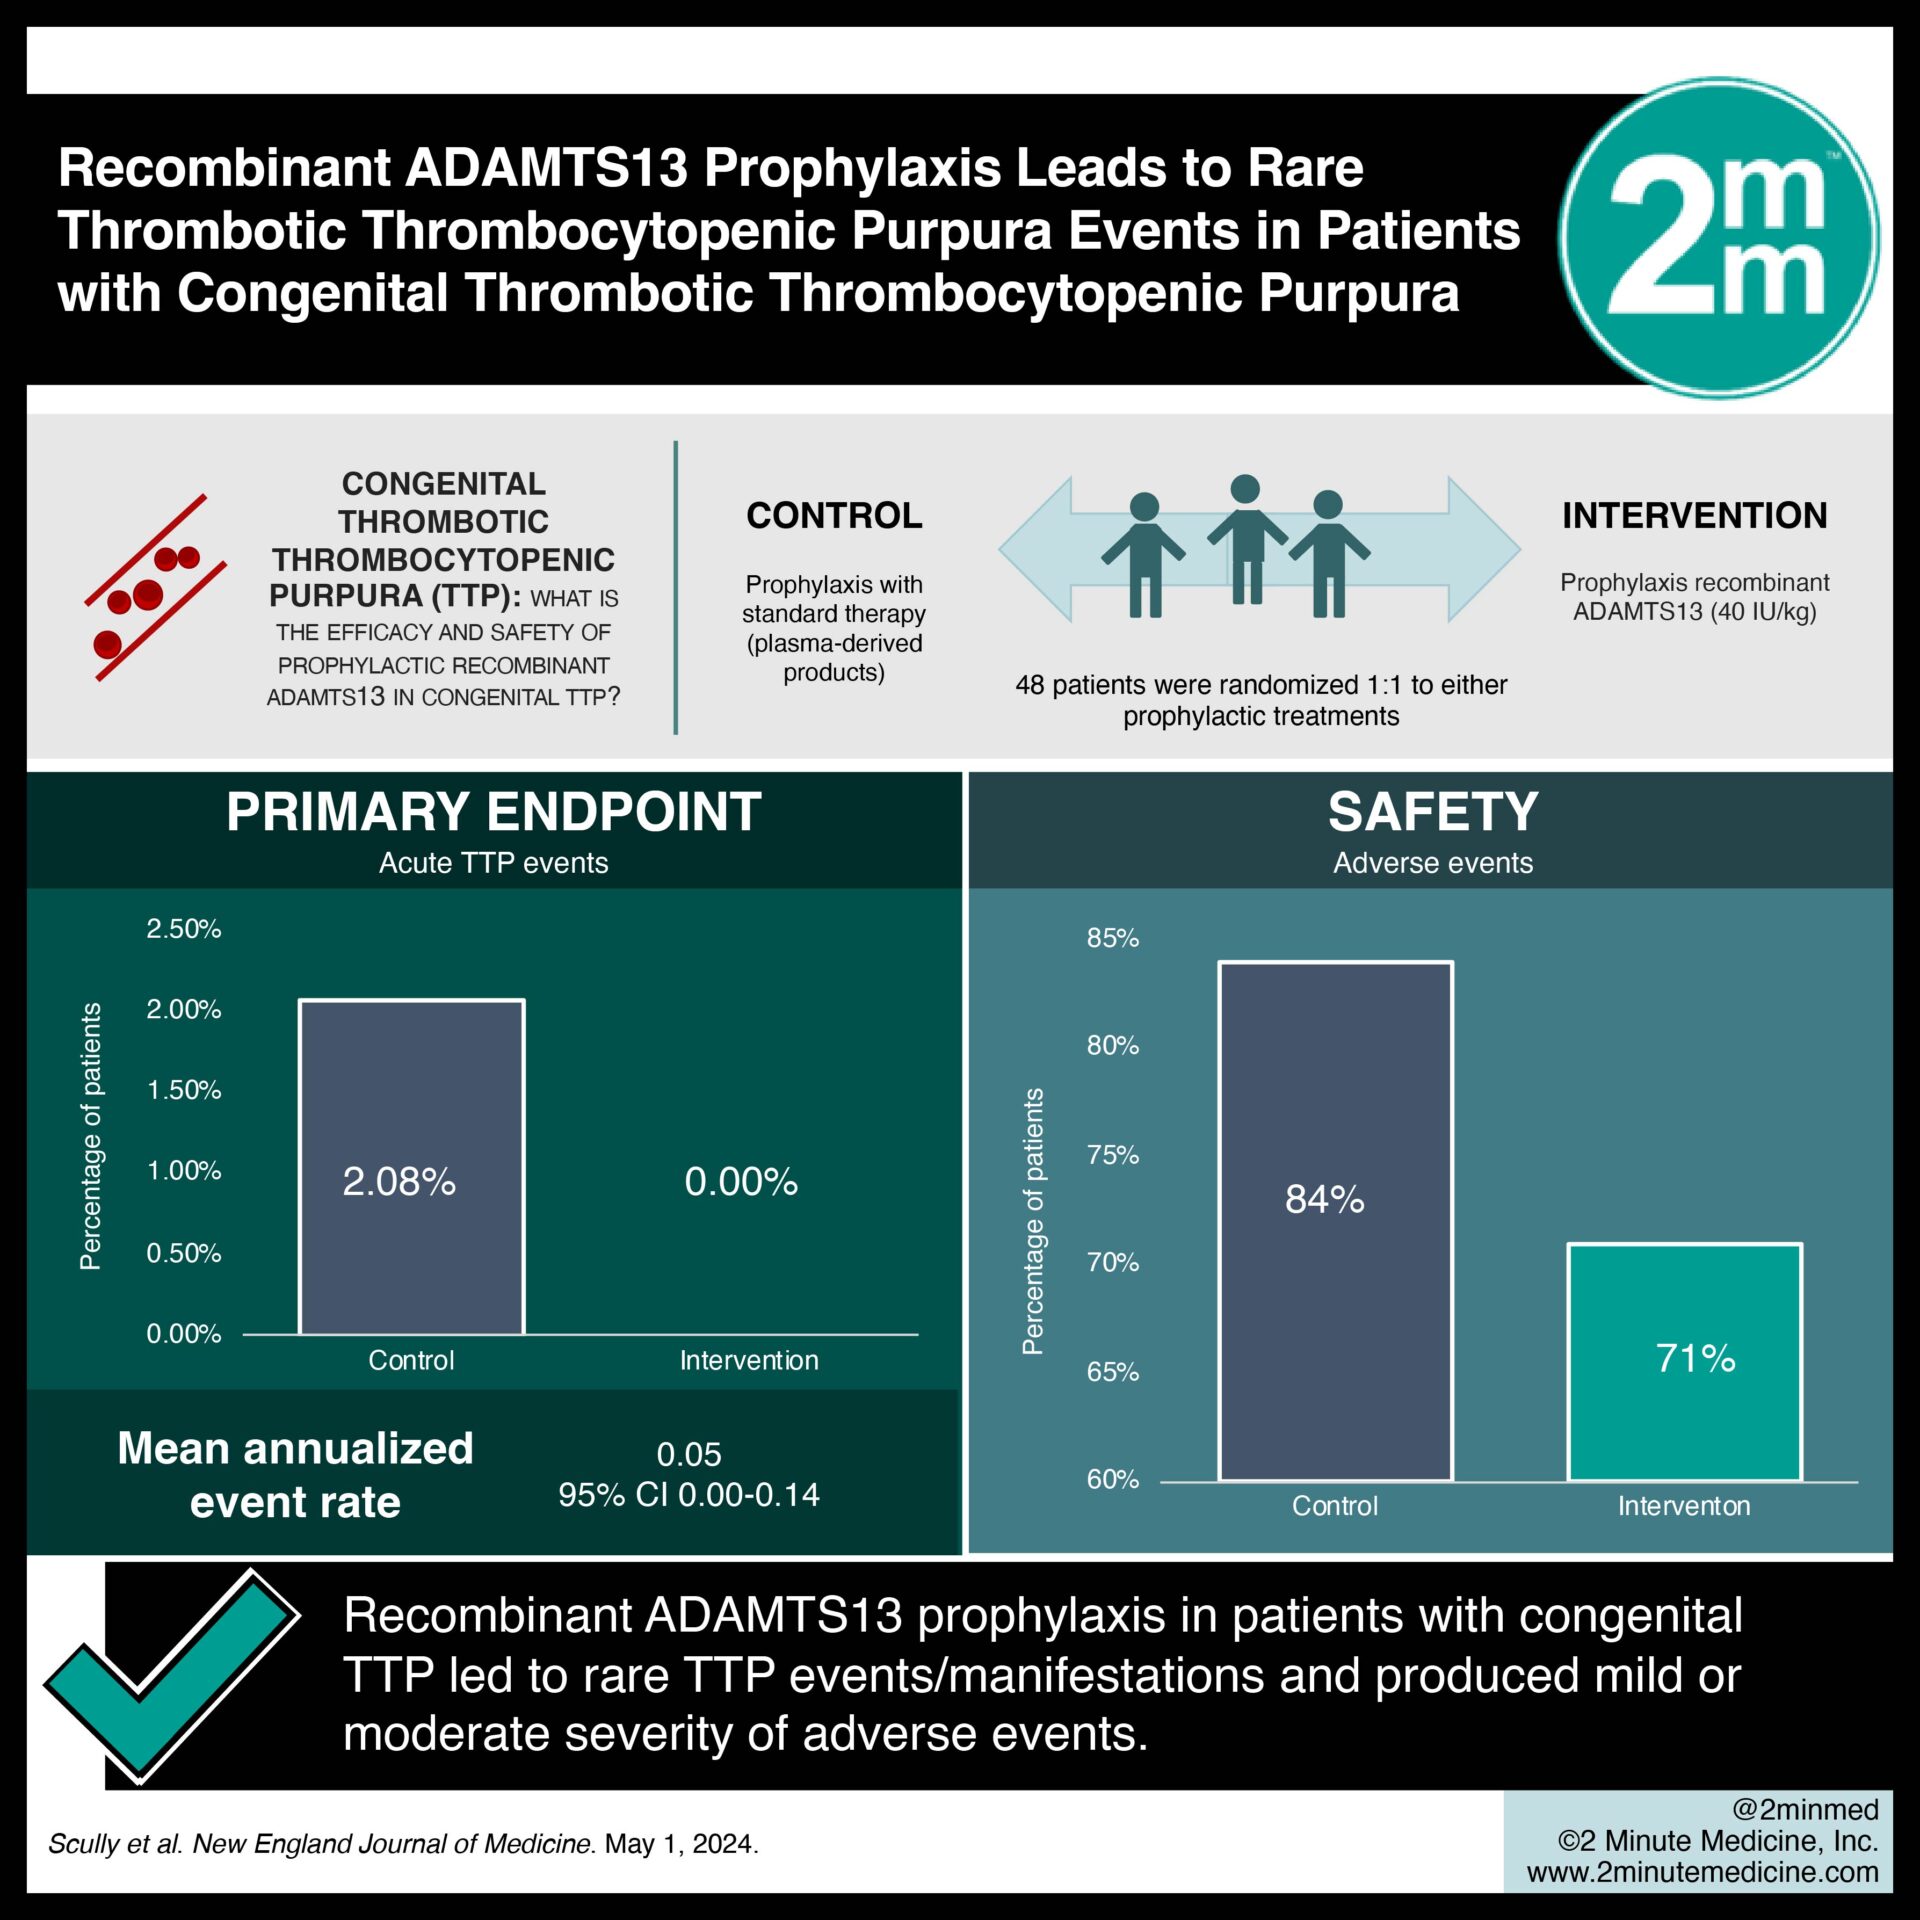 #VisualAbstract: Recombinant ADAMTS13 Prophylaxis Leads to Rare Thrombotic Thrombocytopenic Purpura Events in Patients with Congenital Thrombotic Thrombocytopenic Purpura